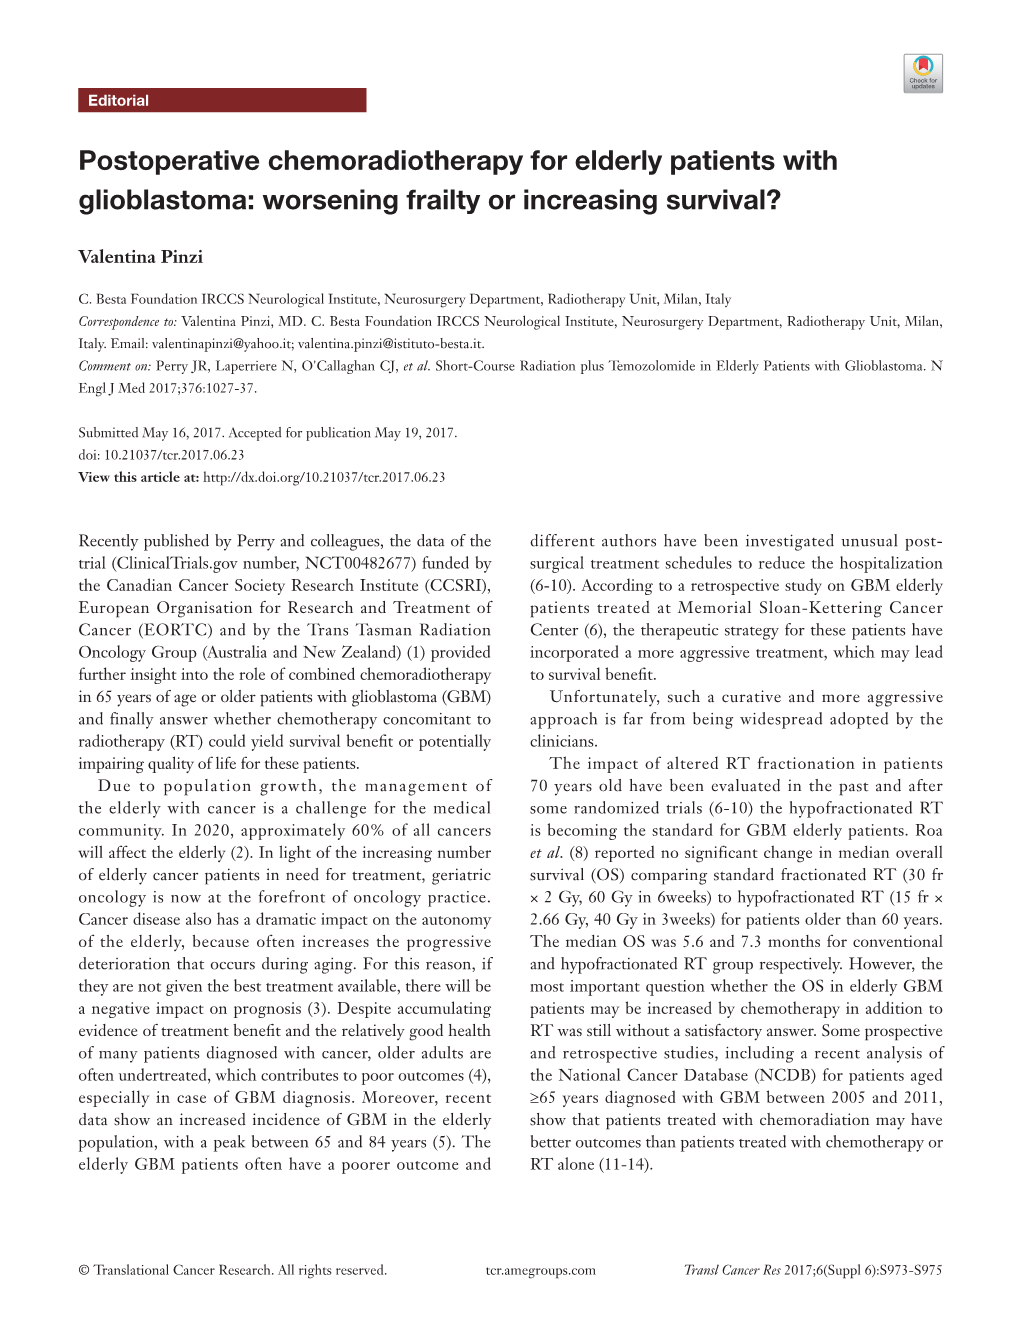 Postoperative Chemoradiotherapy for Elderly Patients with Glioblastoma: Worsening Frailty Or Increasing Survival?